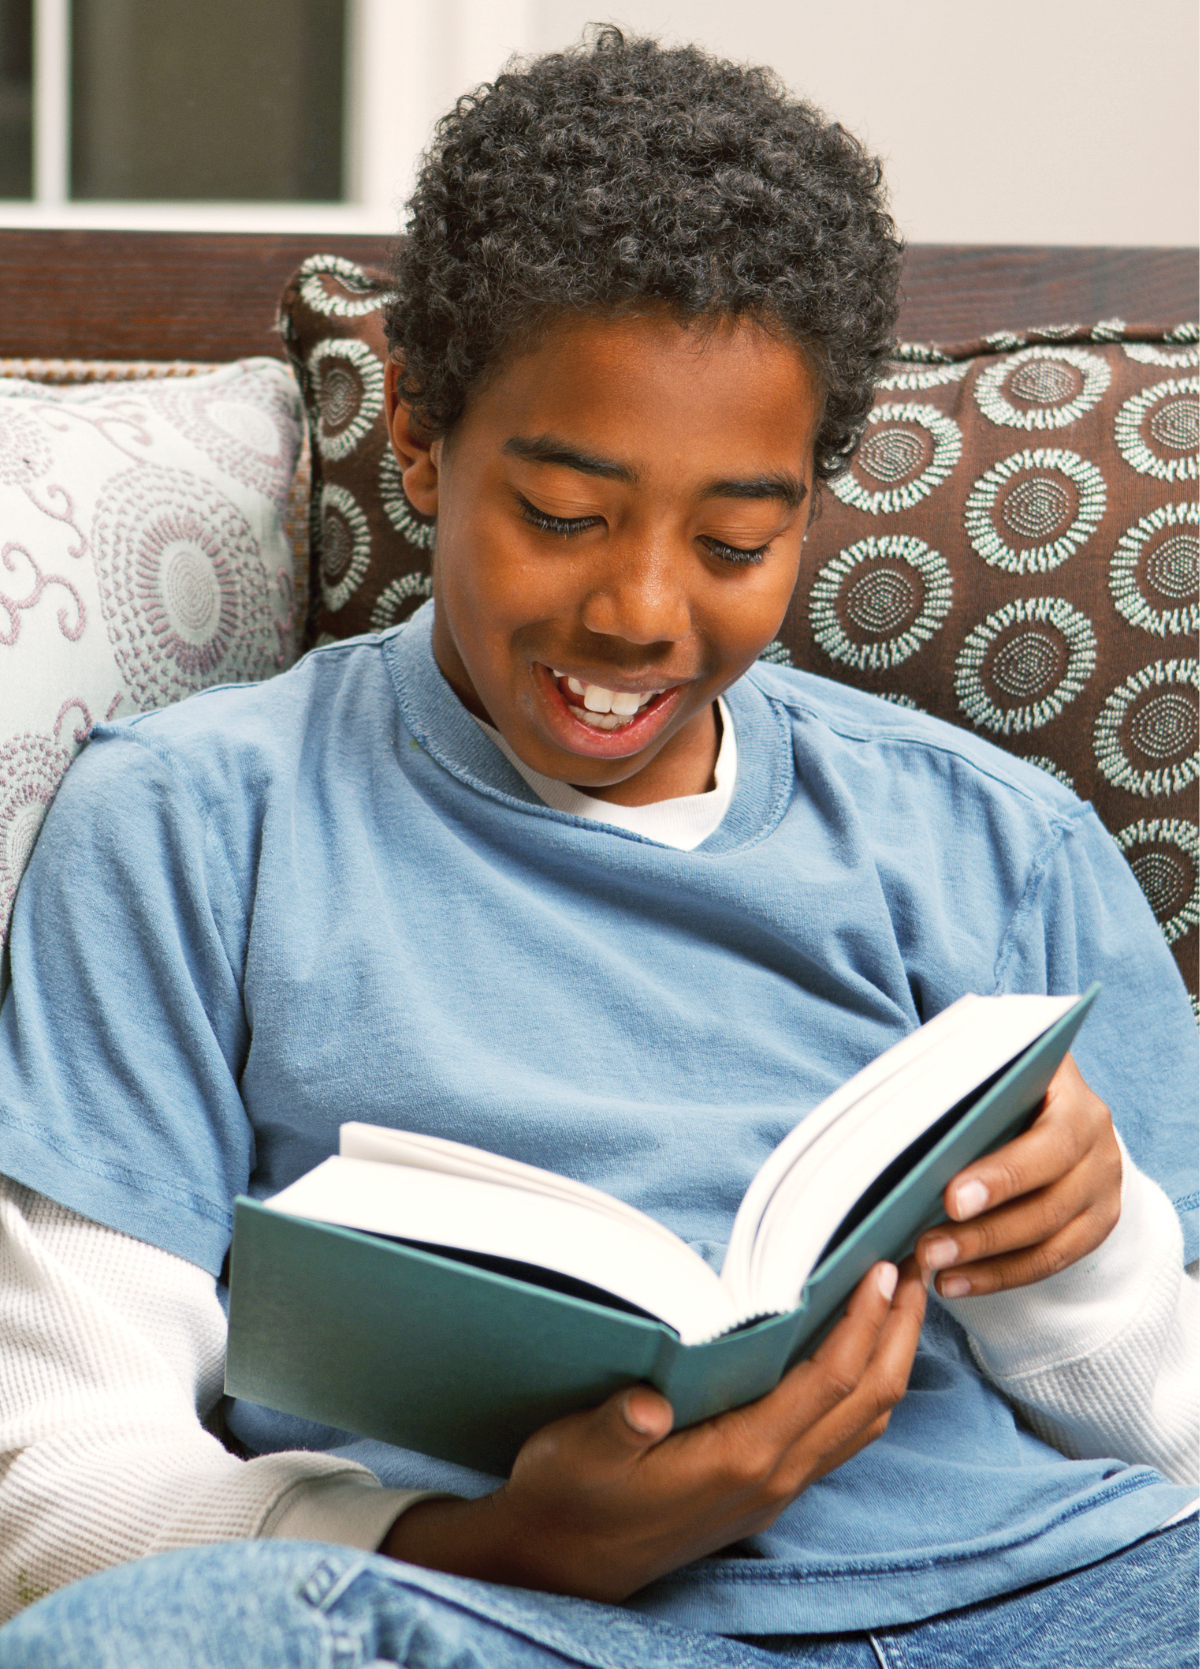  Photograph of a smiling child seated against pillows reading a hardcover book